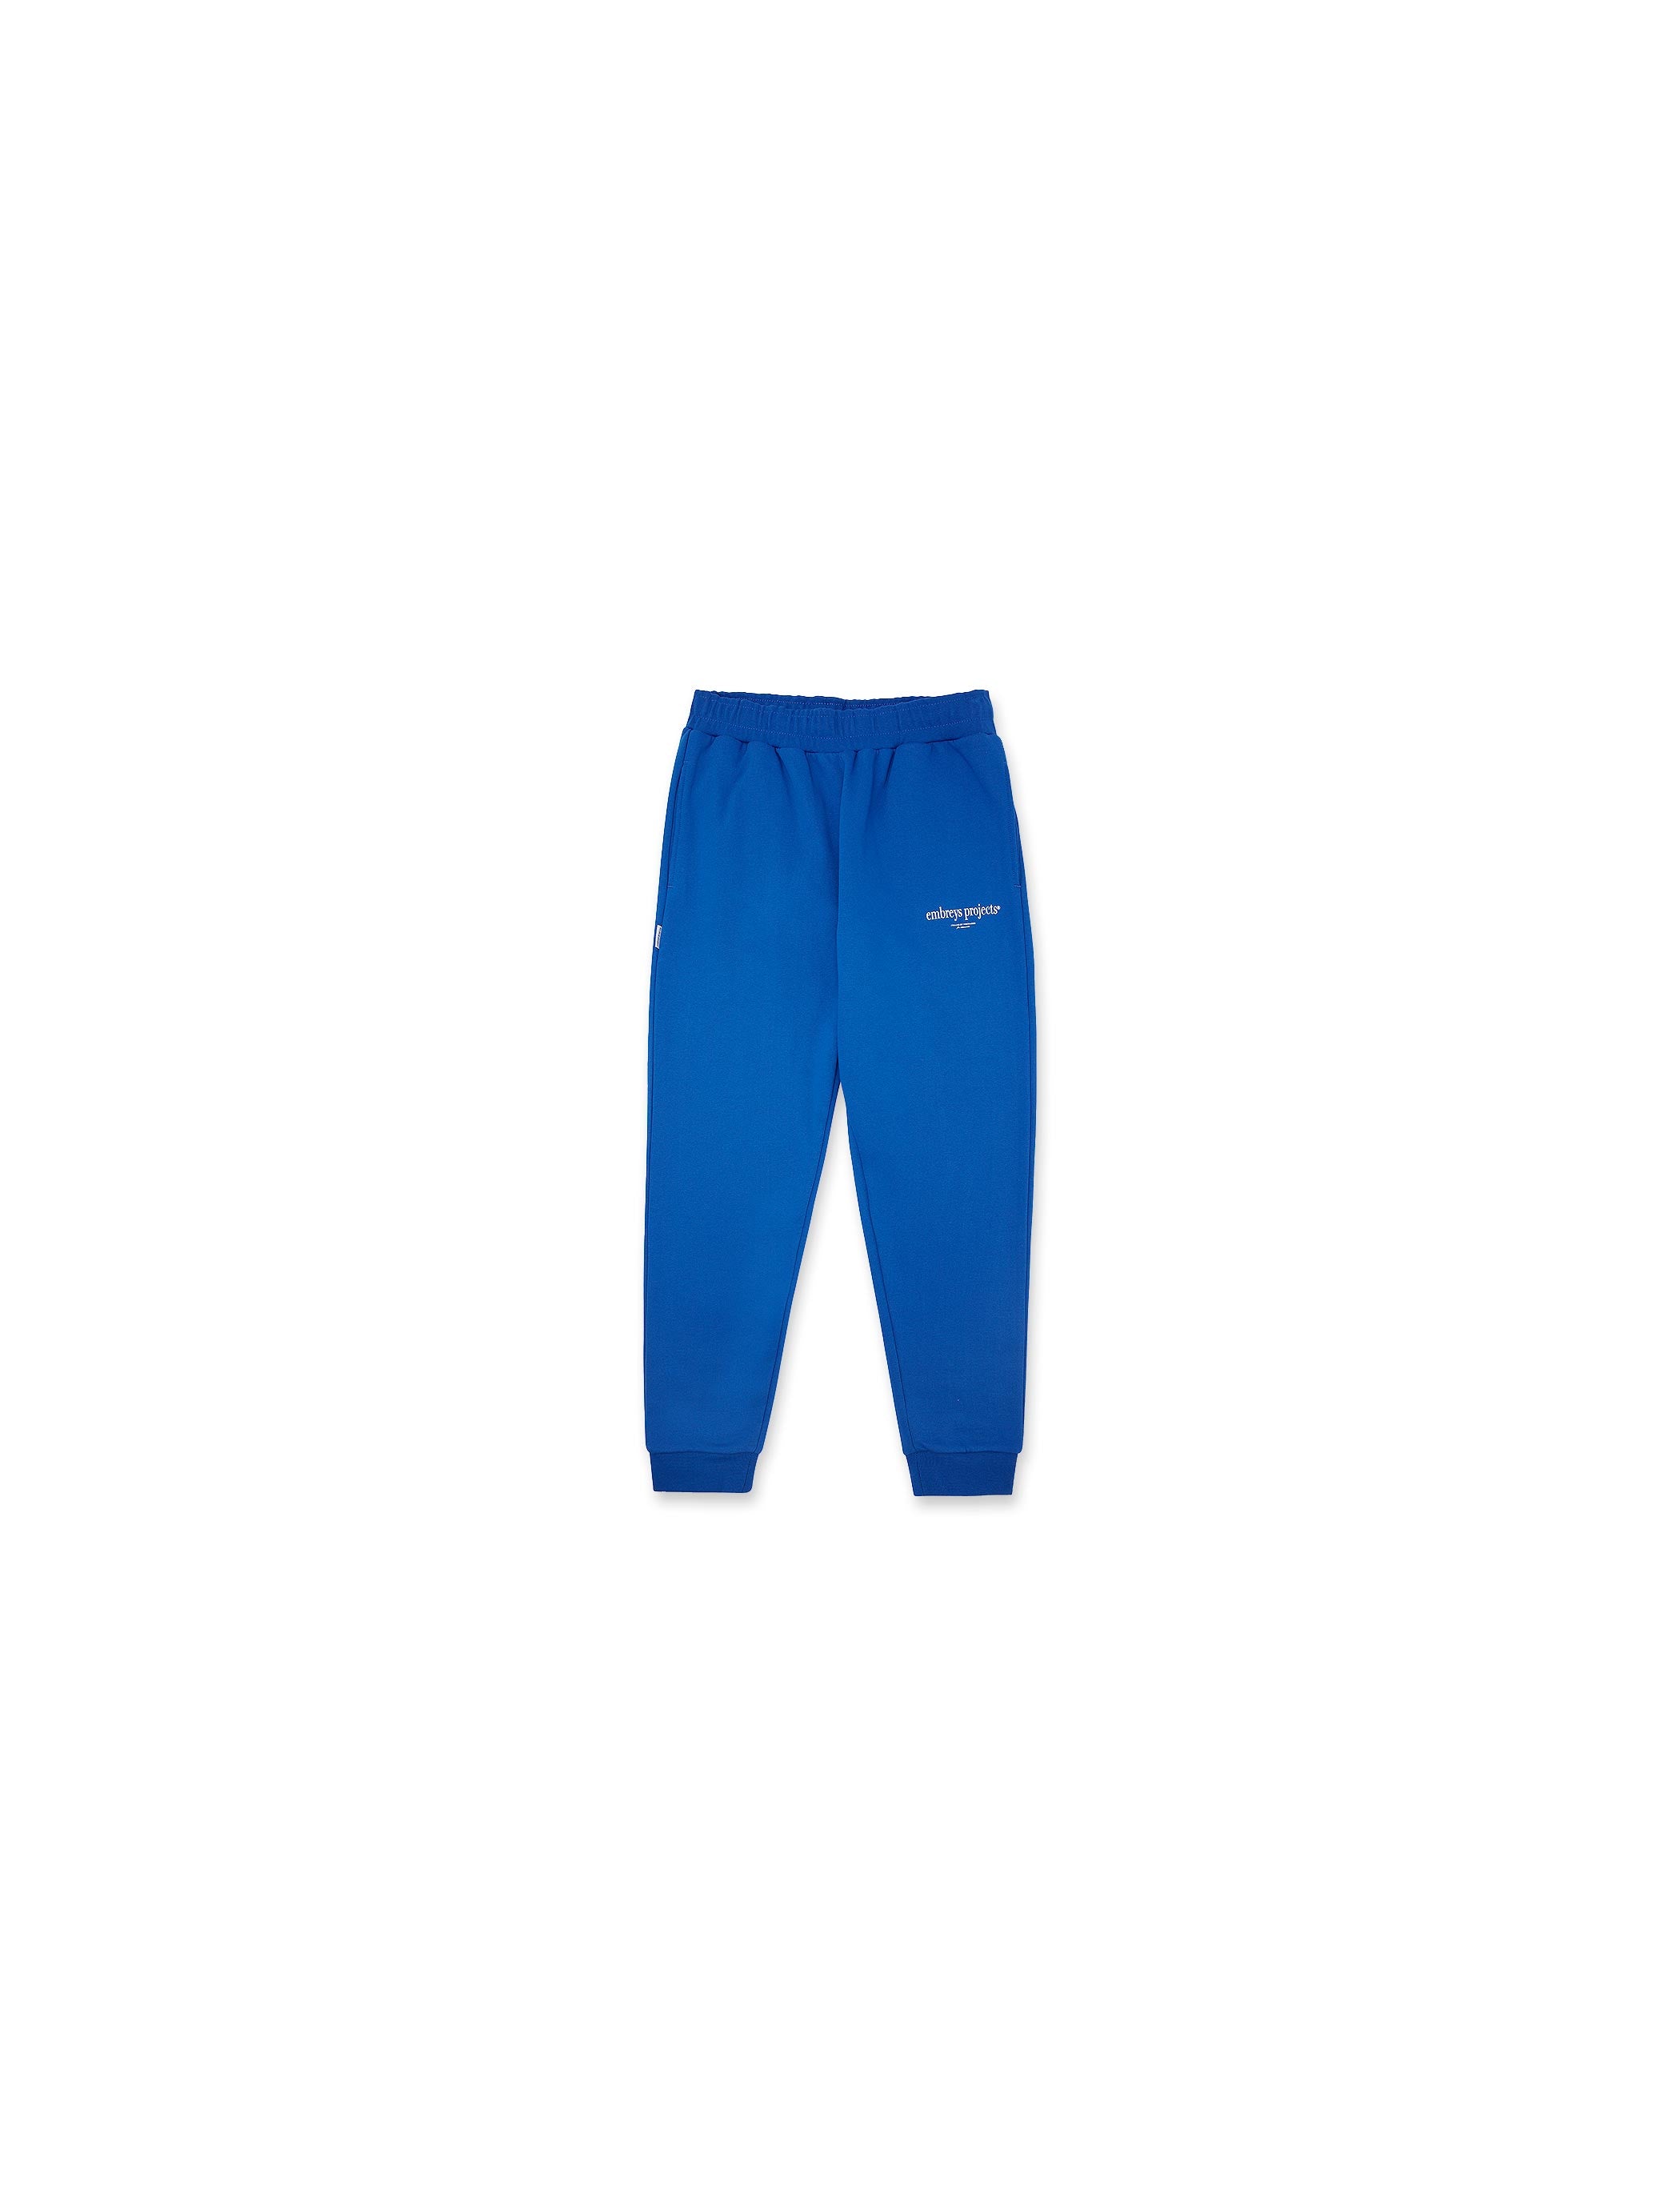 FEEL JOGGER - BLUE LOLITE - Embreys Projects